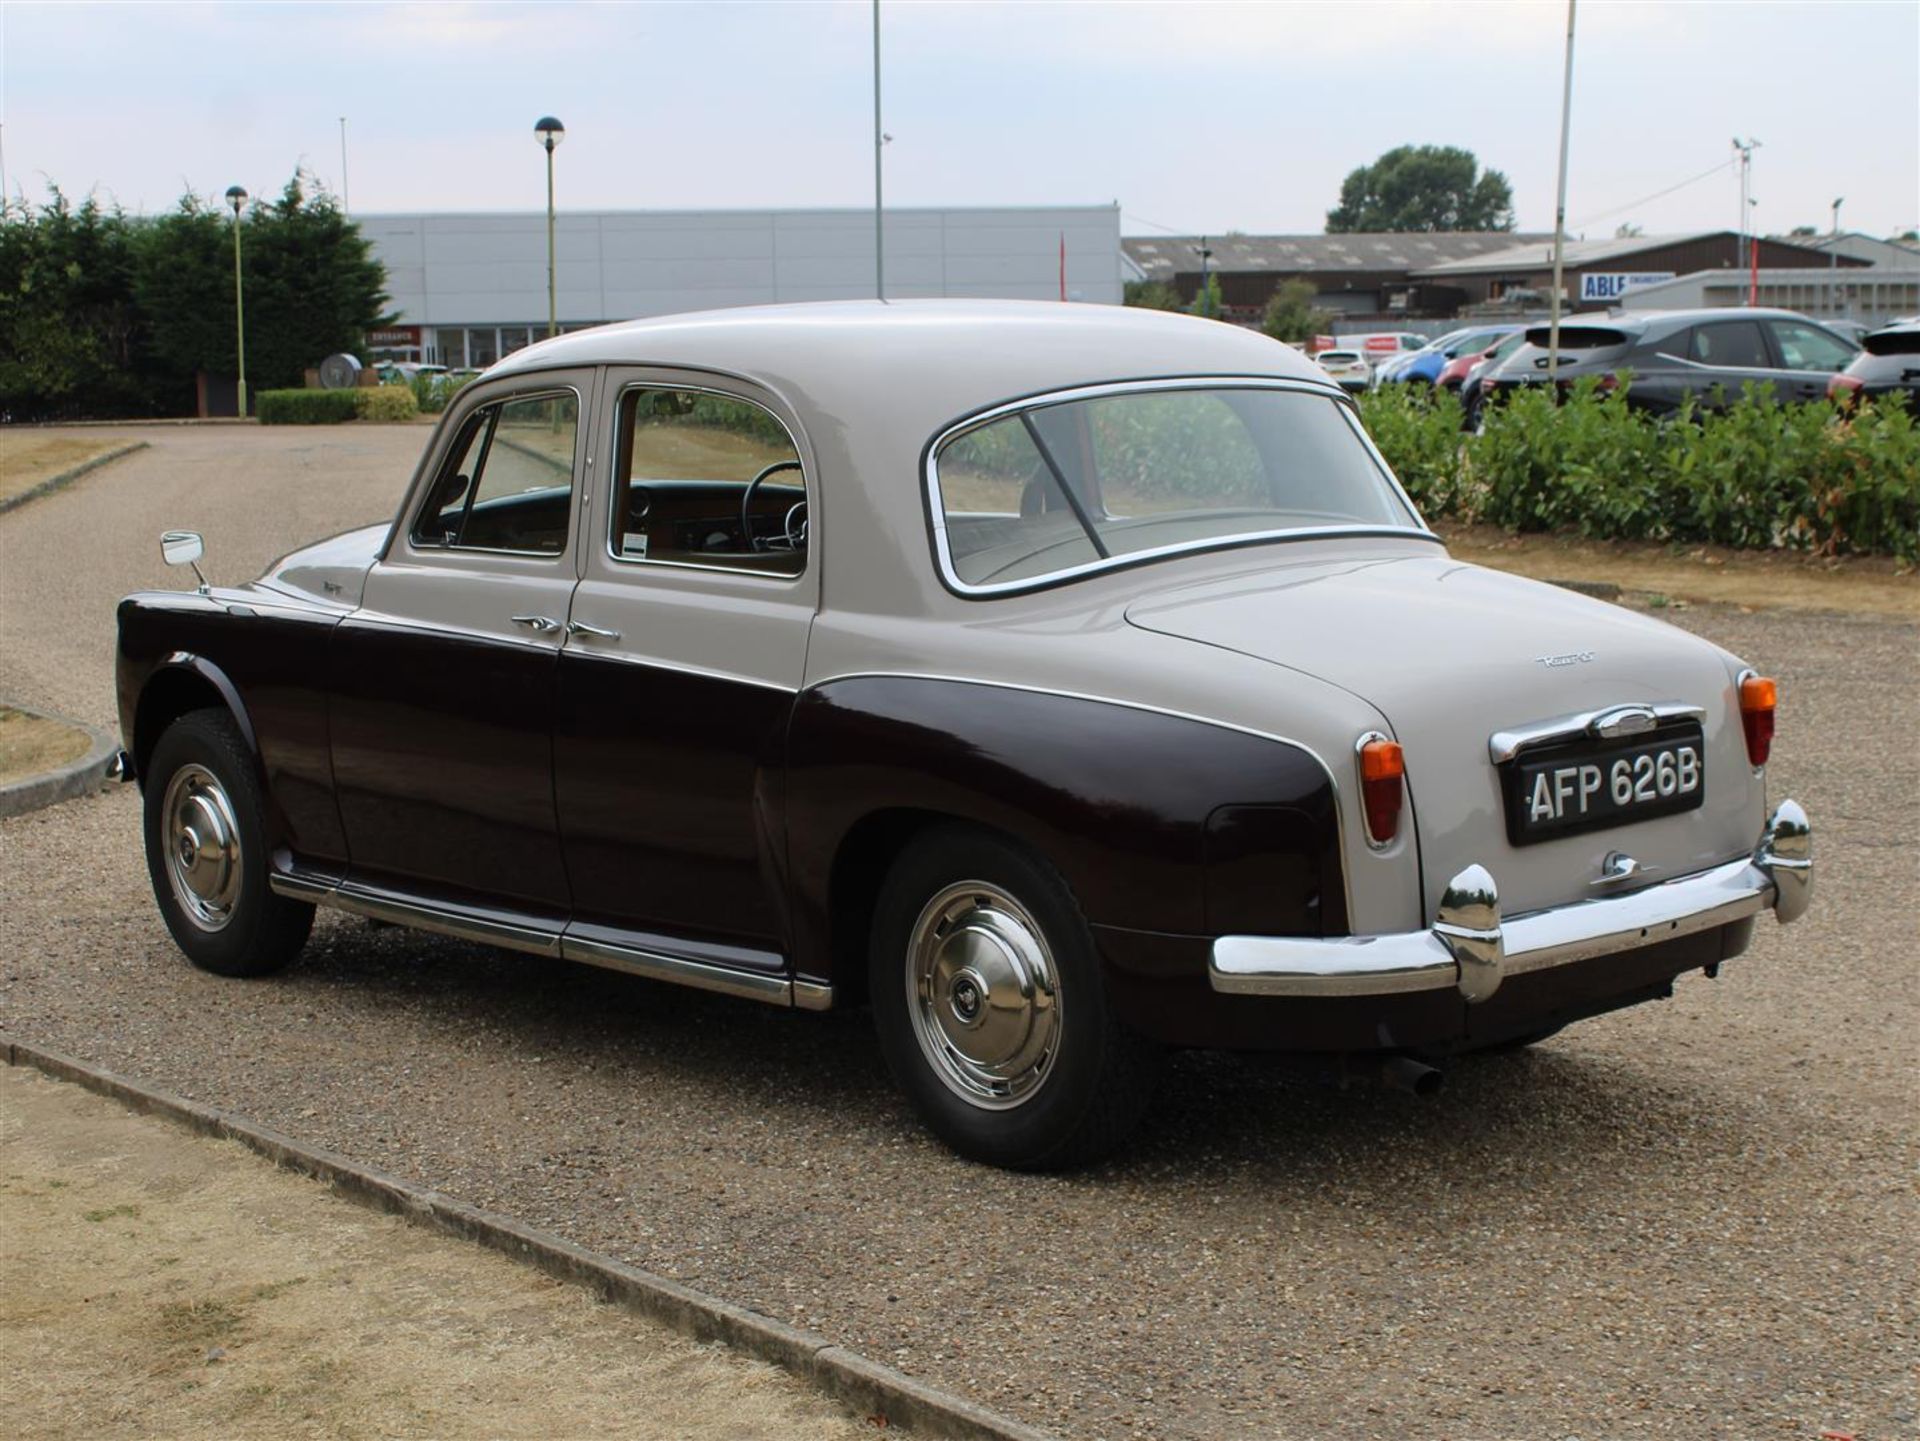 1964 Rover P4 95 Saloon - Image 4 of 23